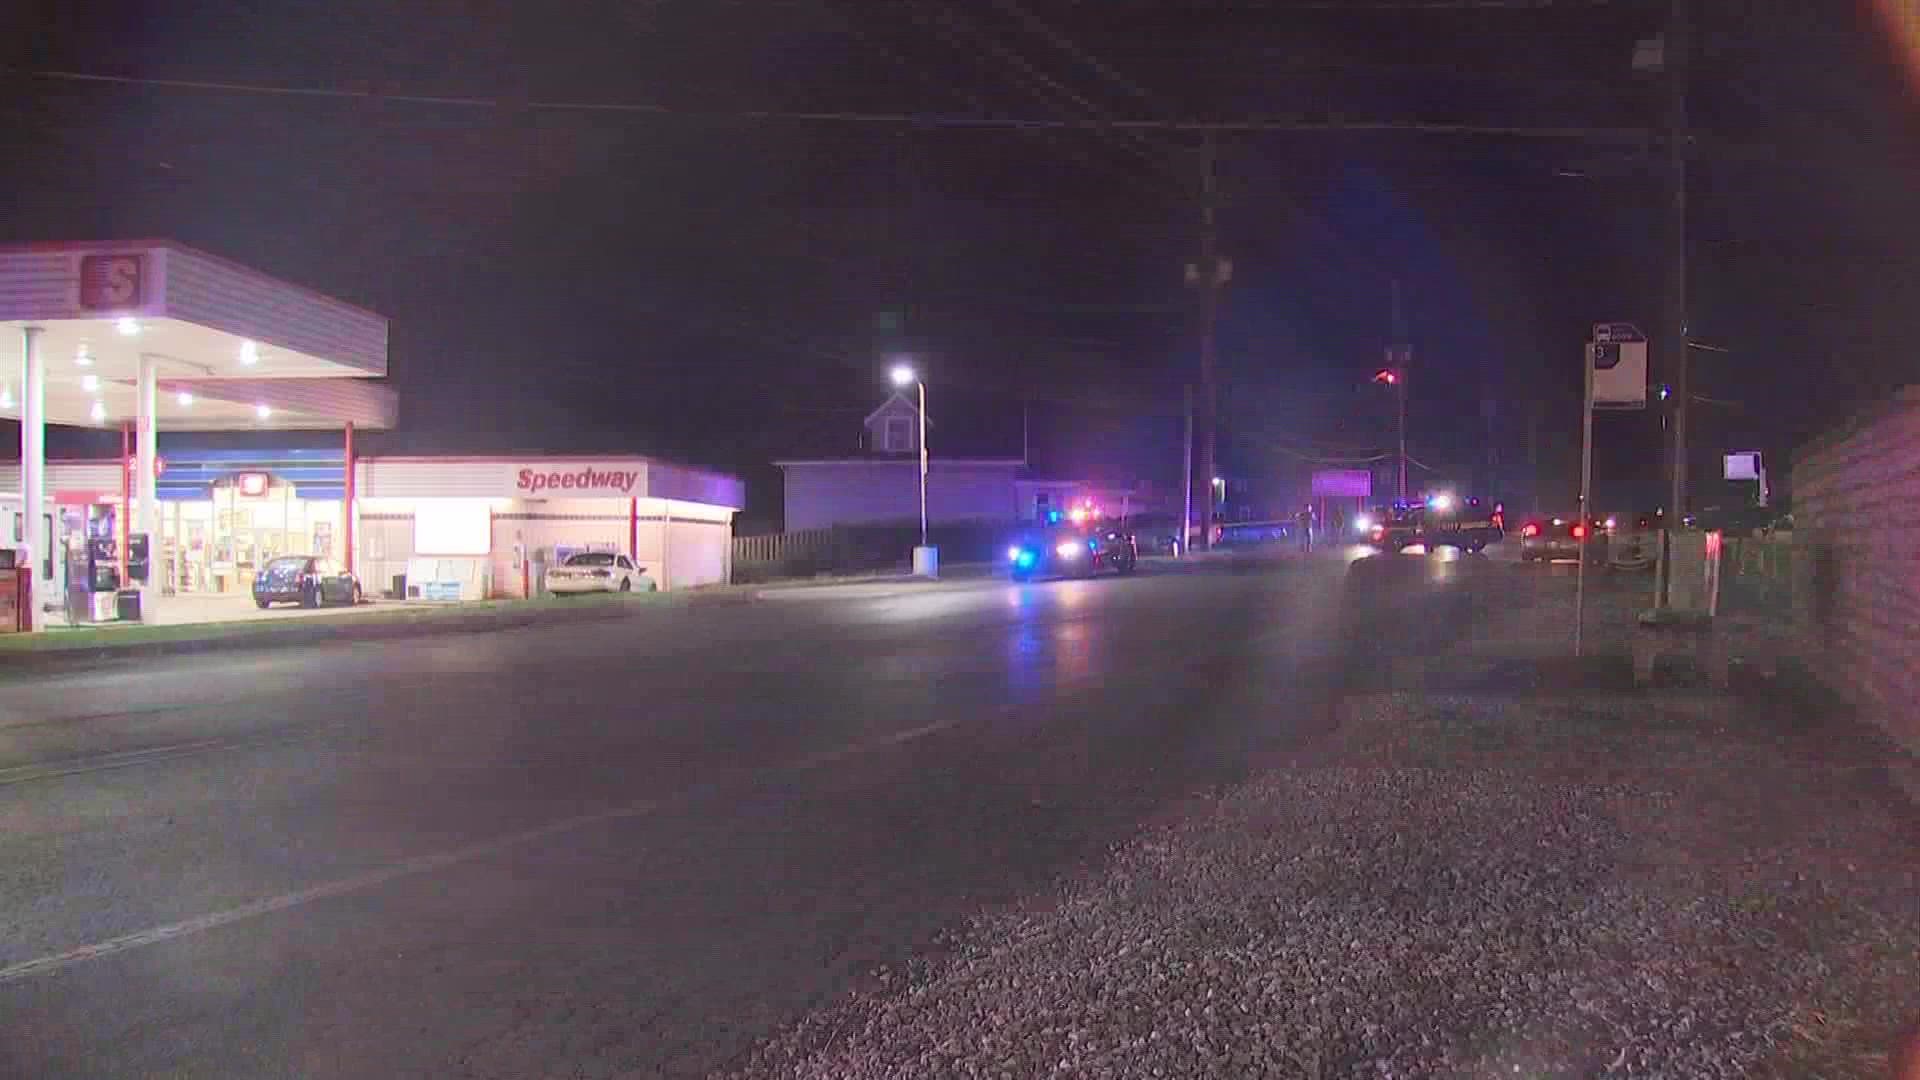 The Franklin County Sheriff's Office said the incident happened around 8:35 p.m. in the area of Harrisburg Pike just south of Brown Road in Franklin Township.